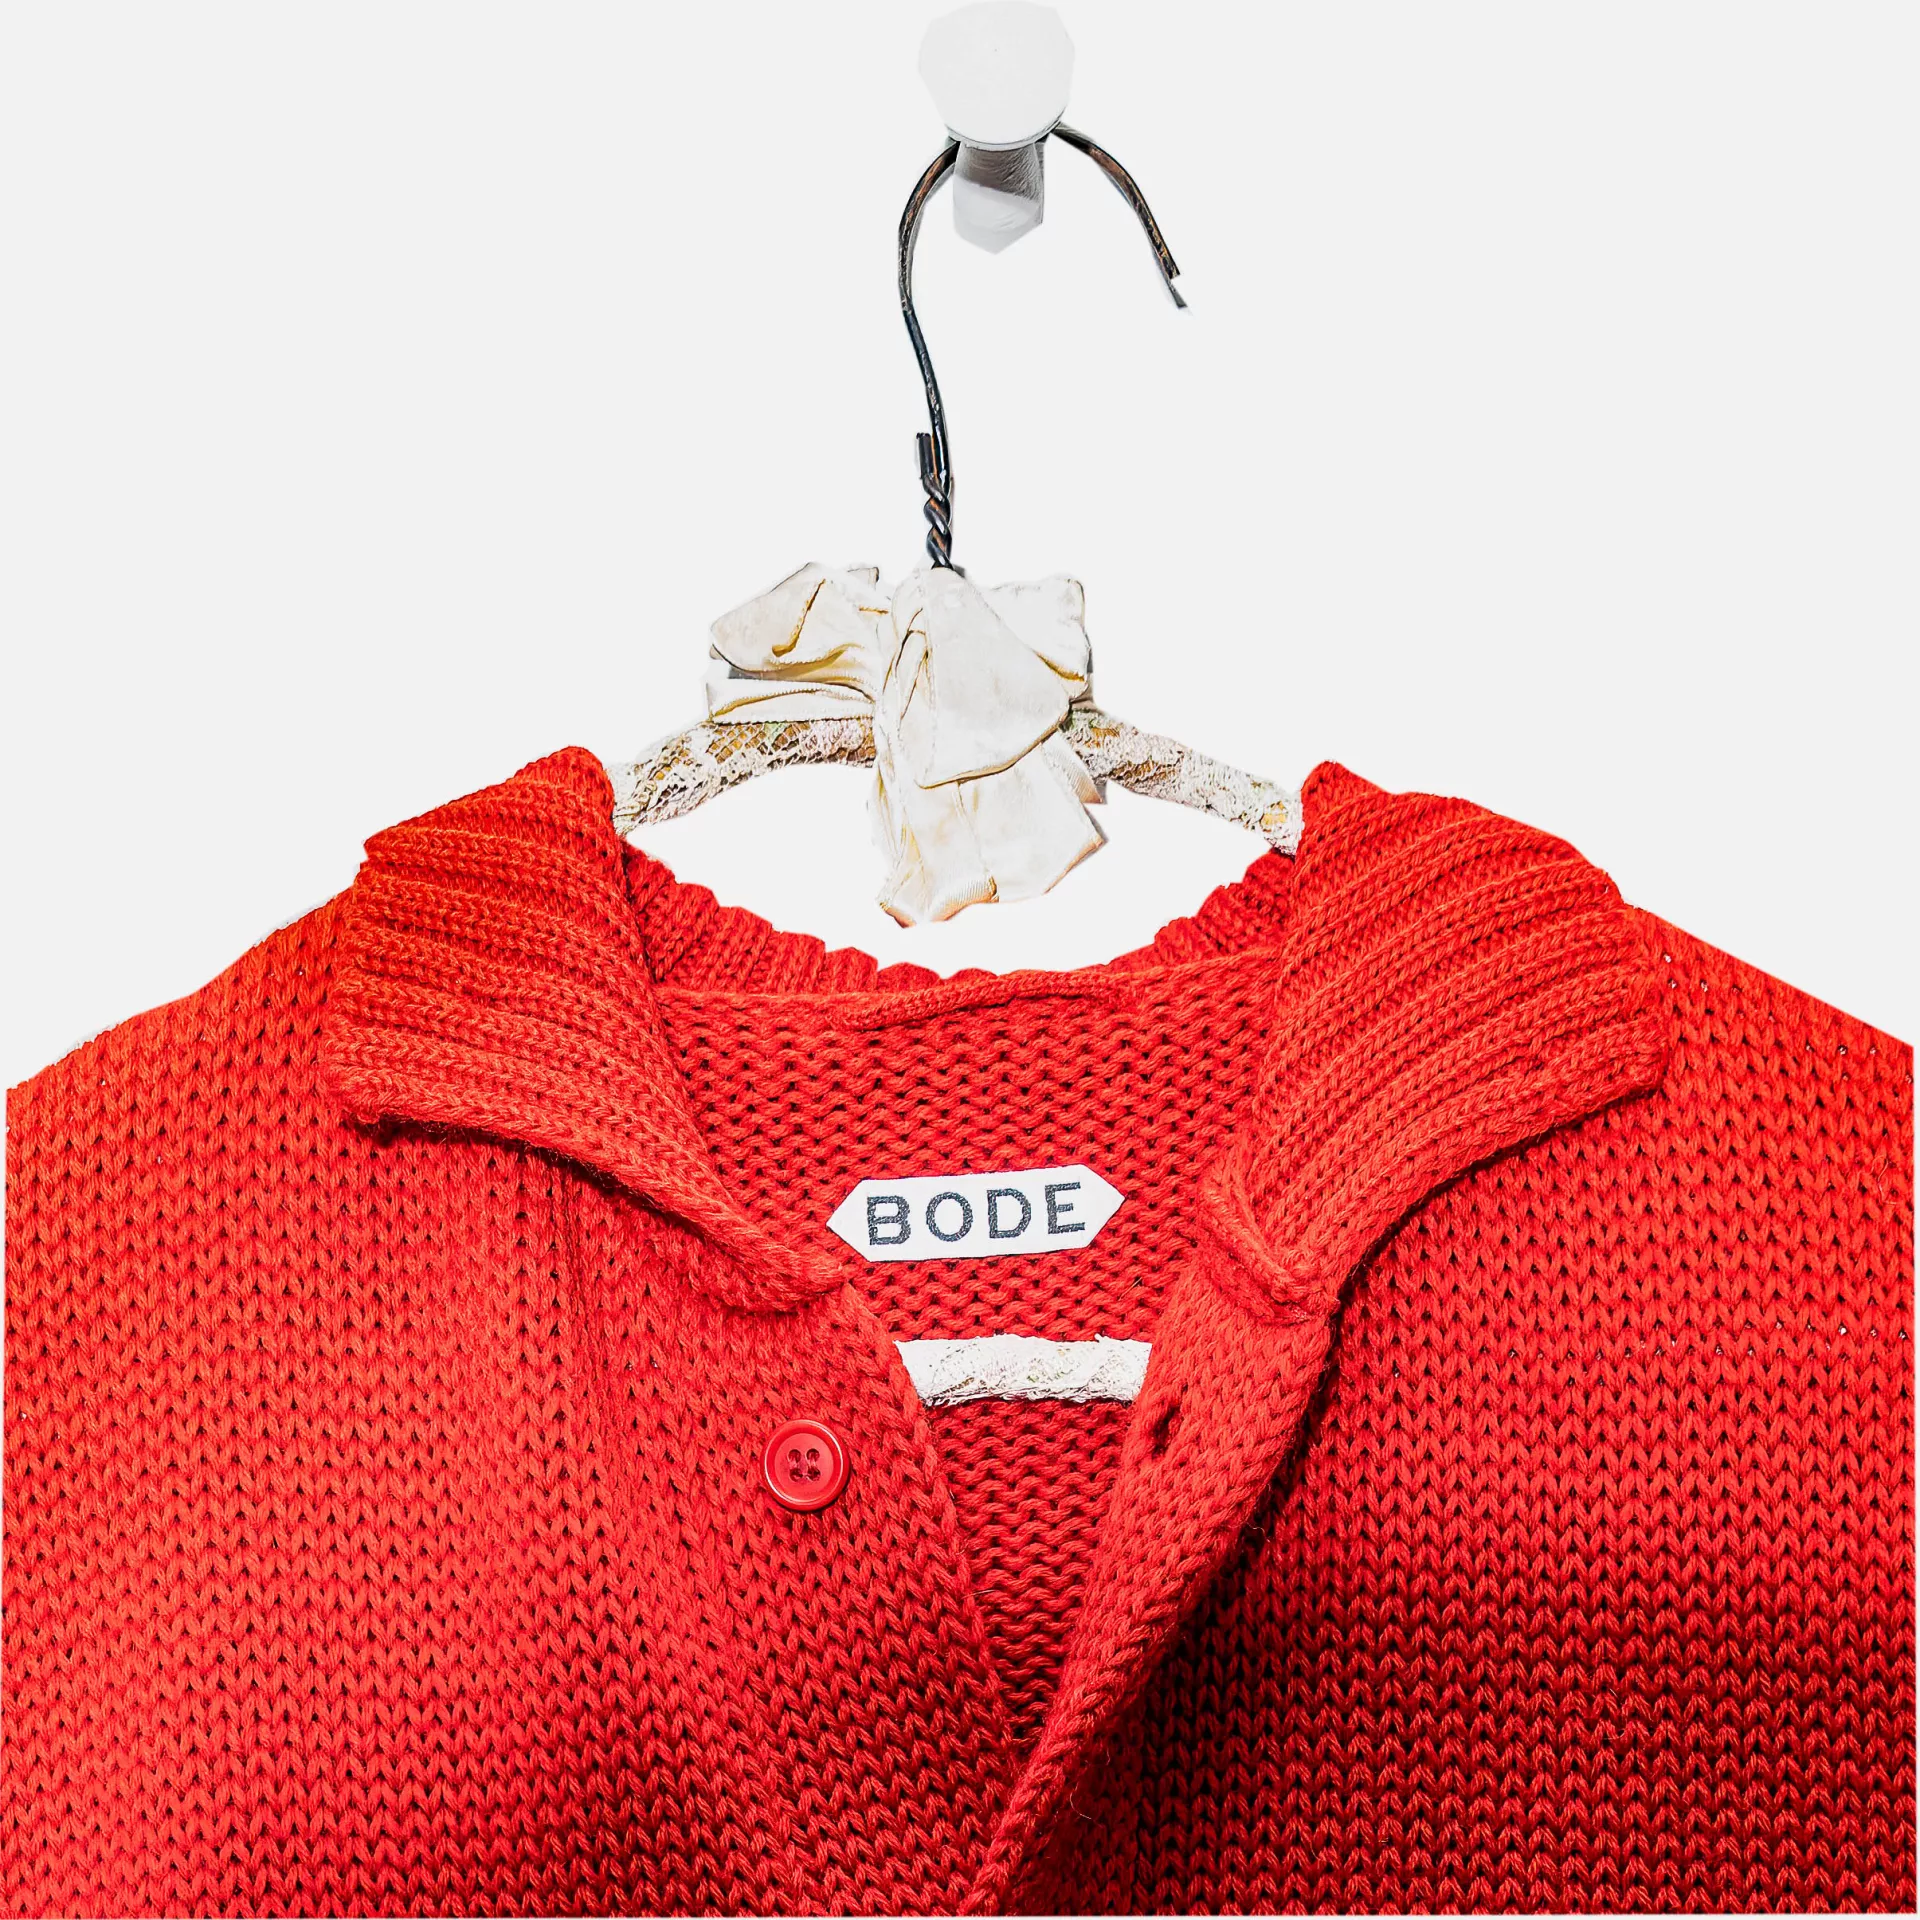 A red Bode sweater hanging on a hanger.